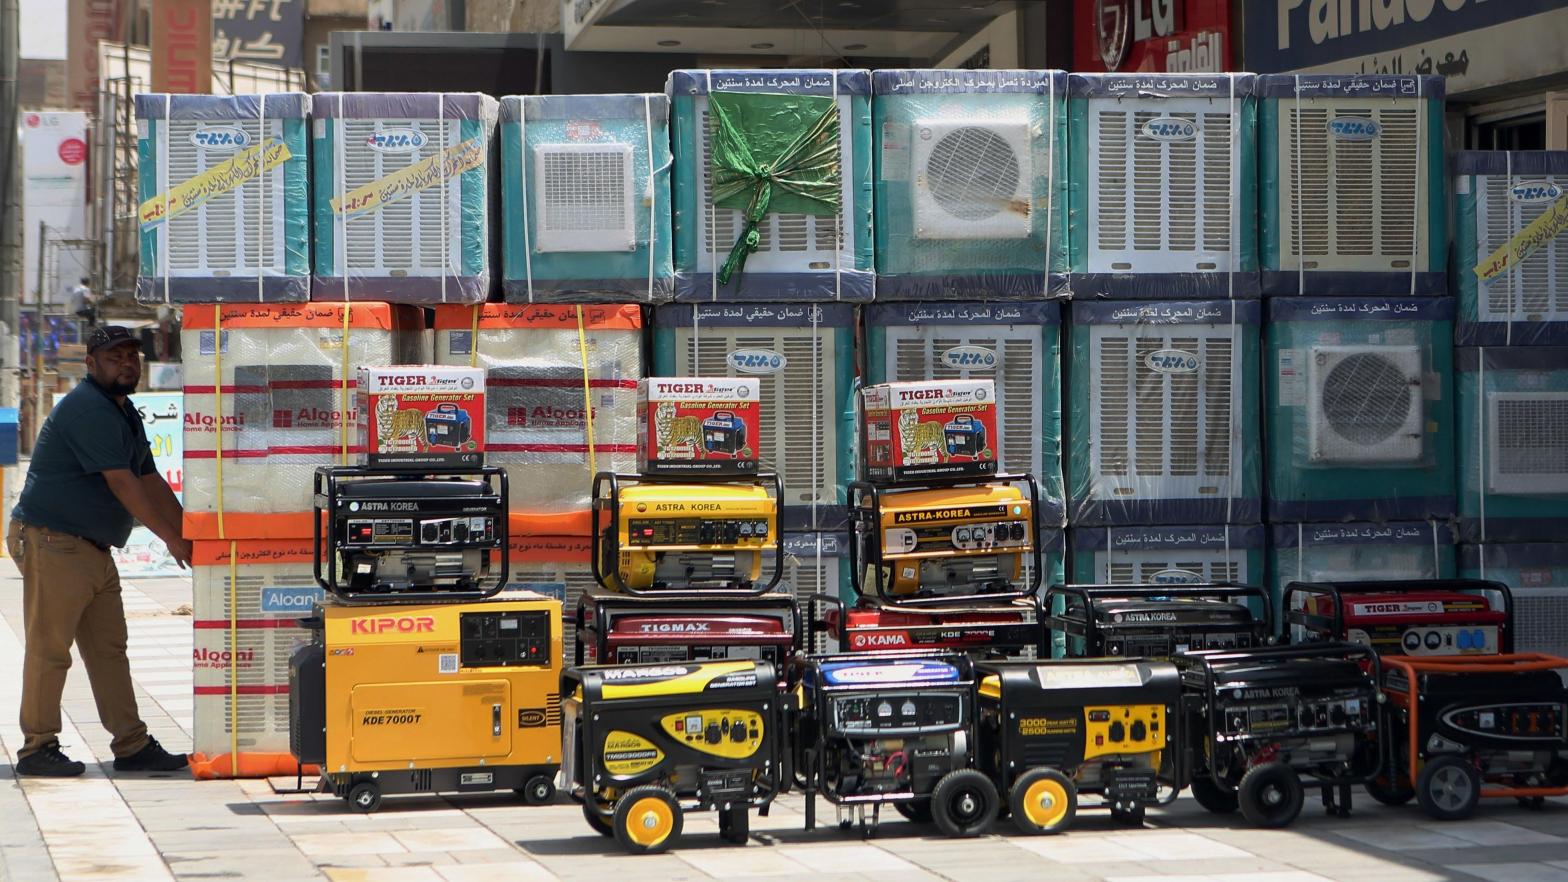 Air conditioners and power generators in Baghdad, Iraq. (Photo: Khalid Mohammed, AP)